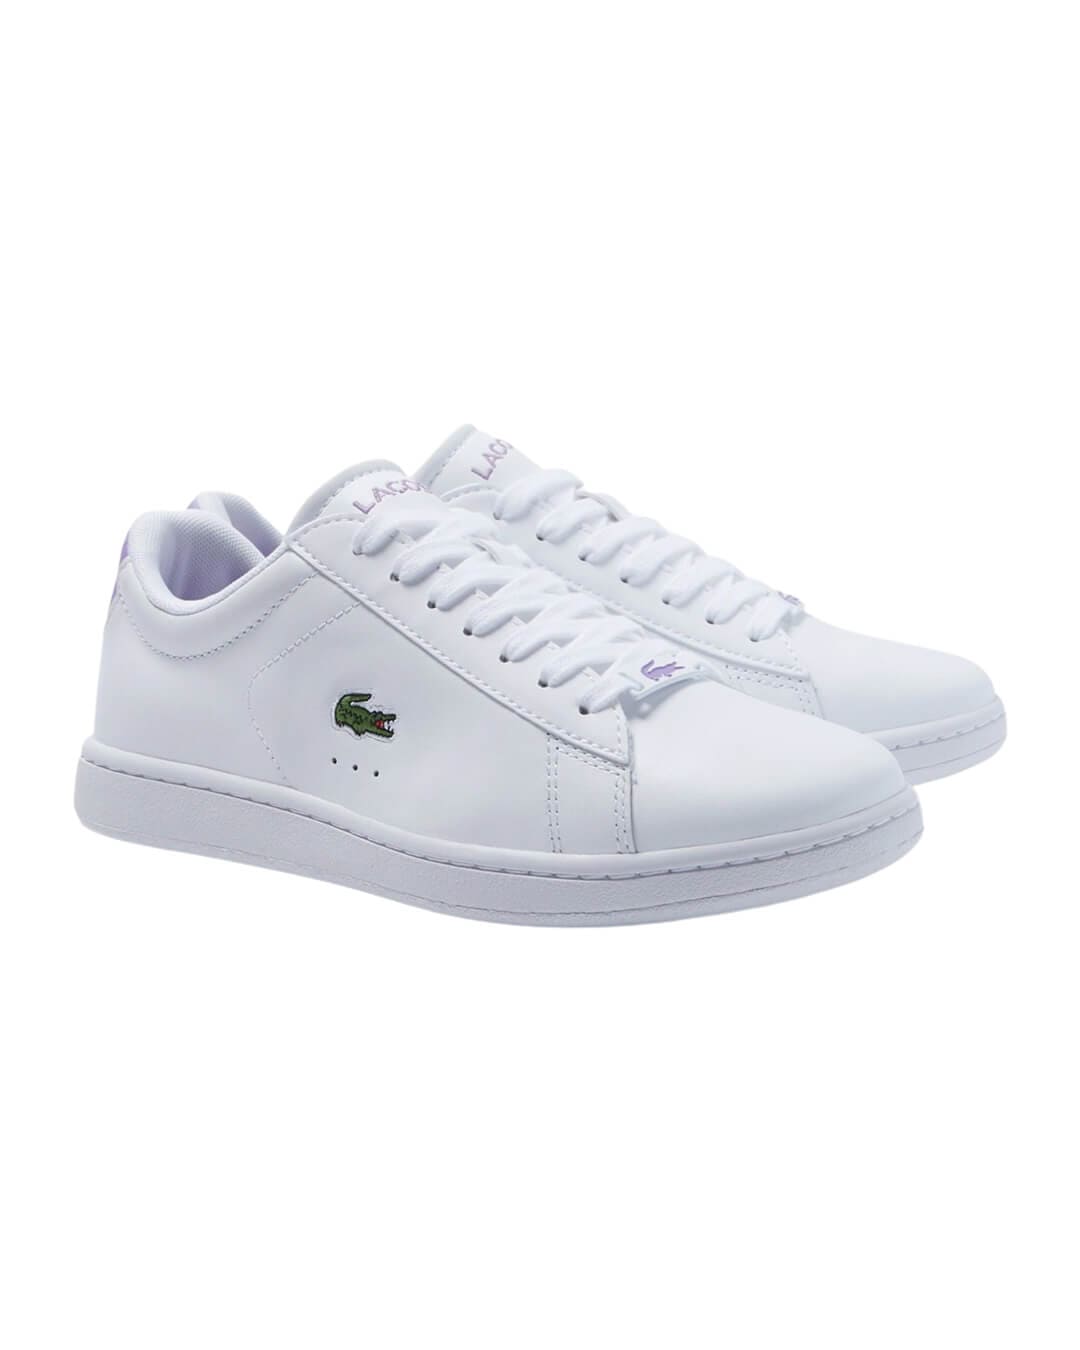 Lacoste Shoes Lacoste Carnaby Leather Popped Heel White Sneakers